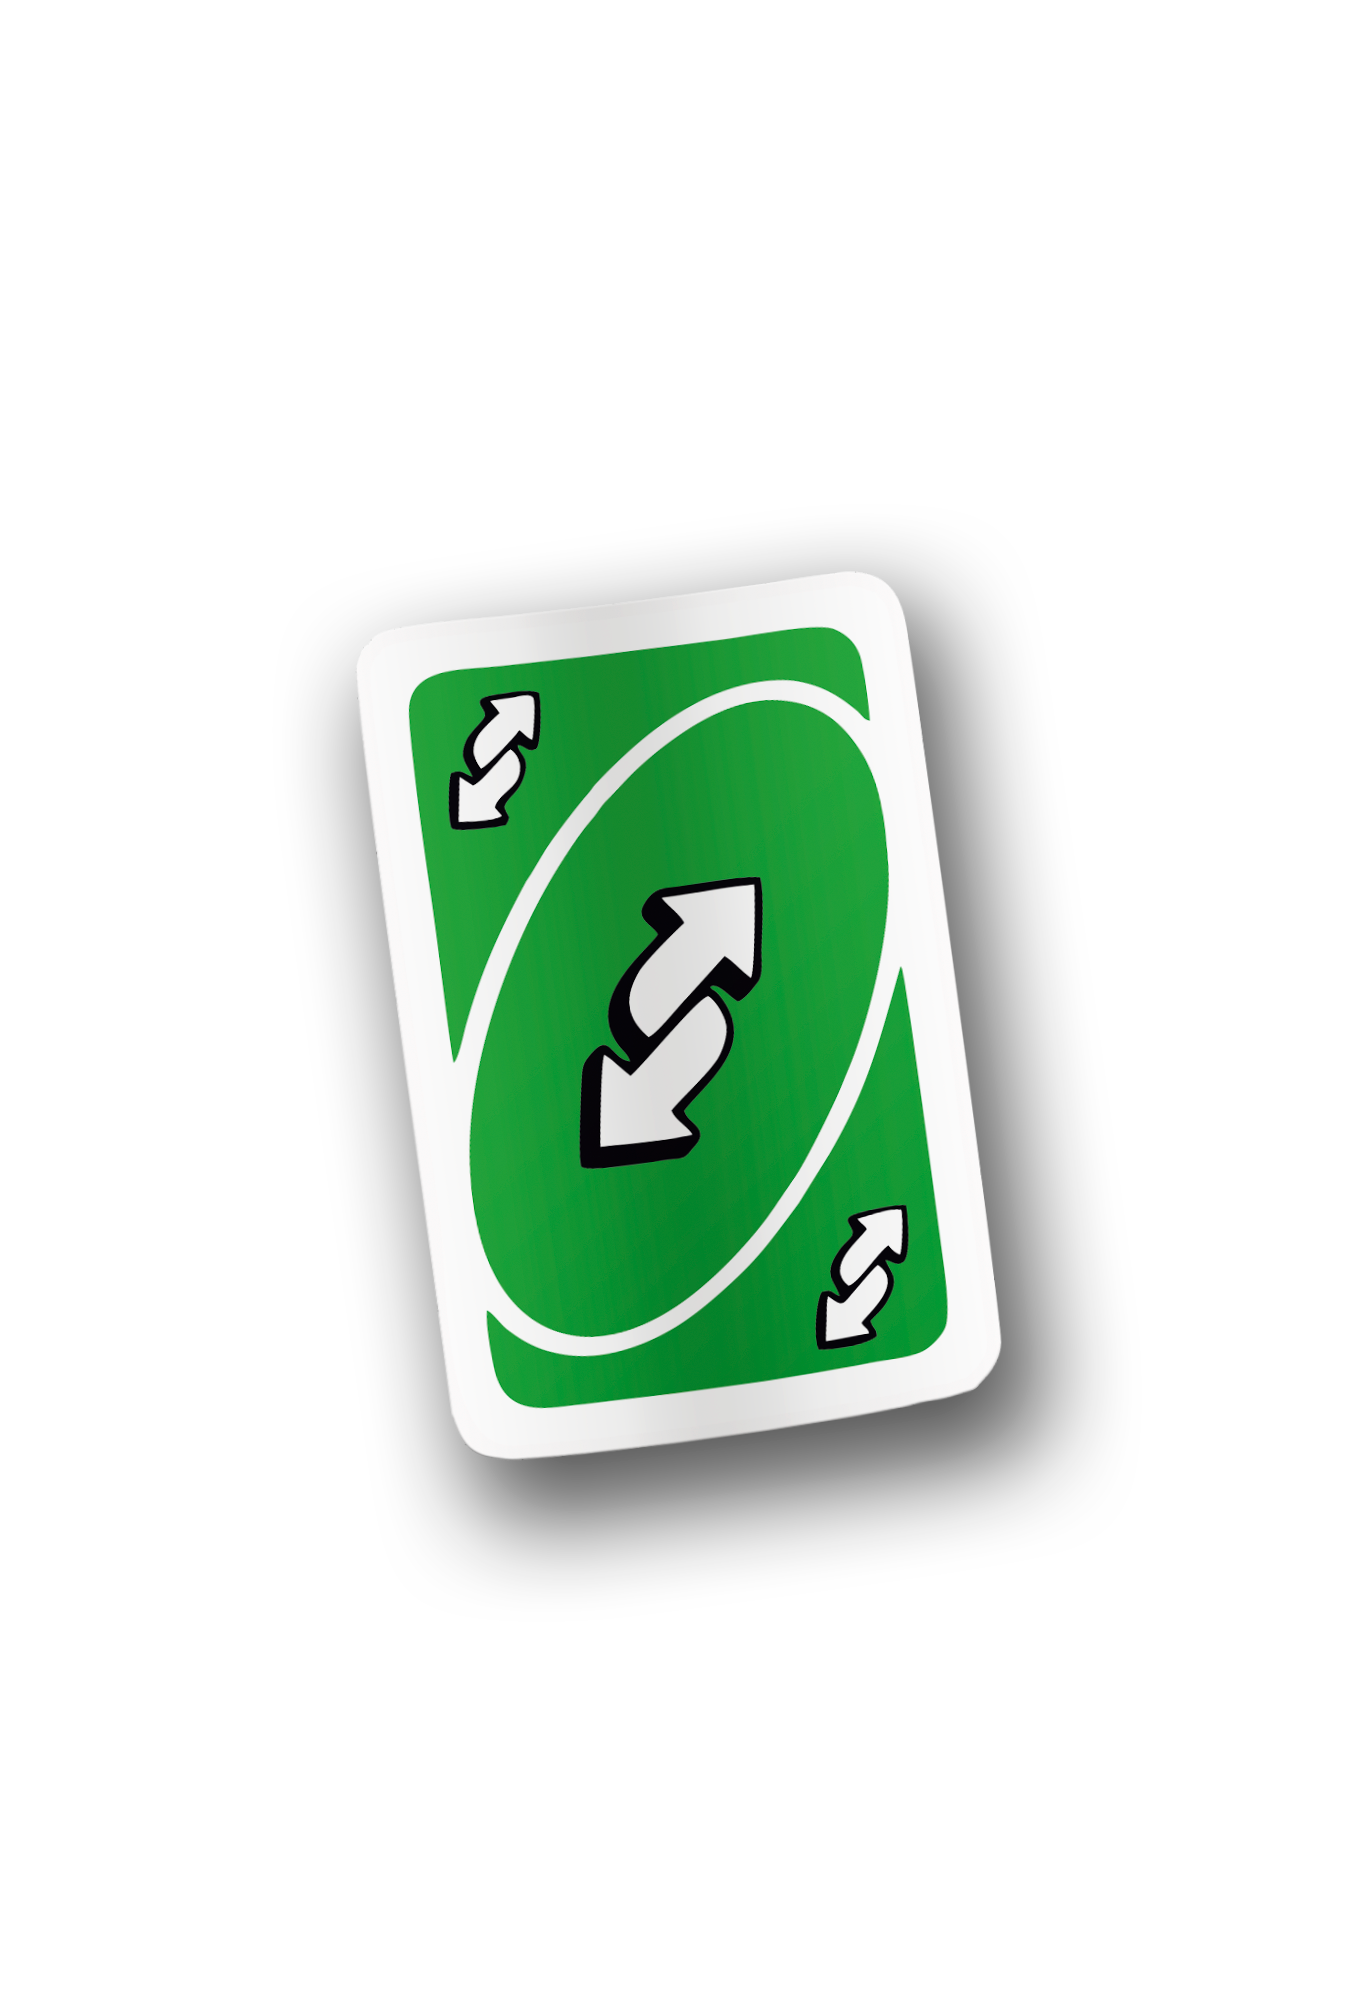 UNO Reverse card - Green | Greeting Card